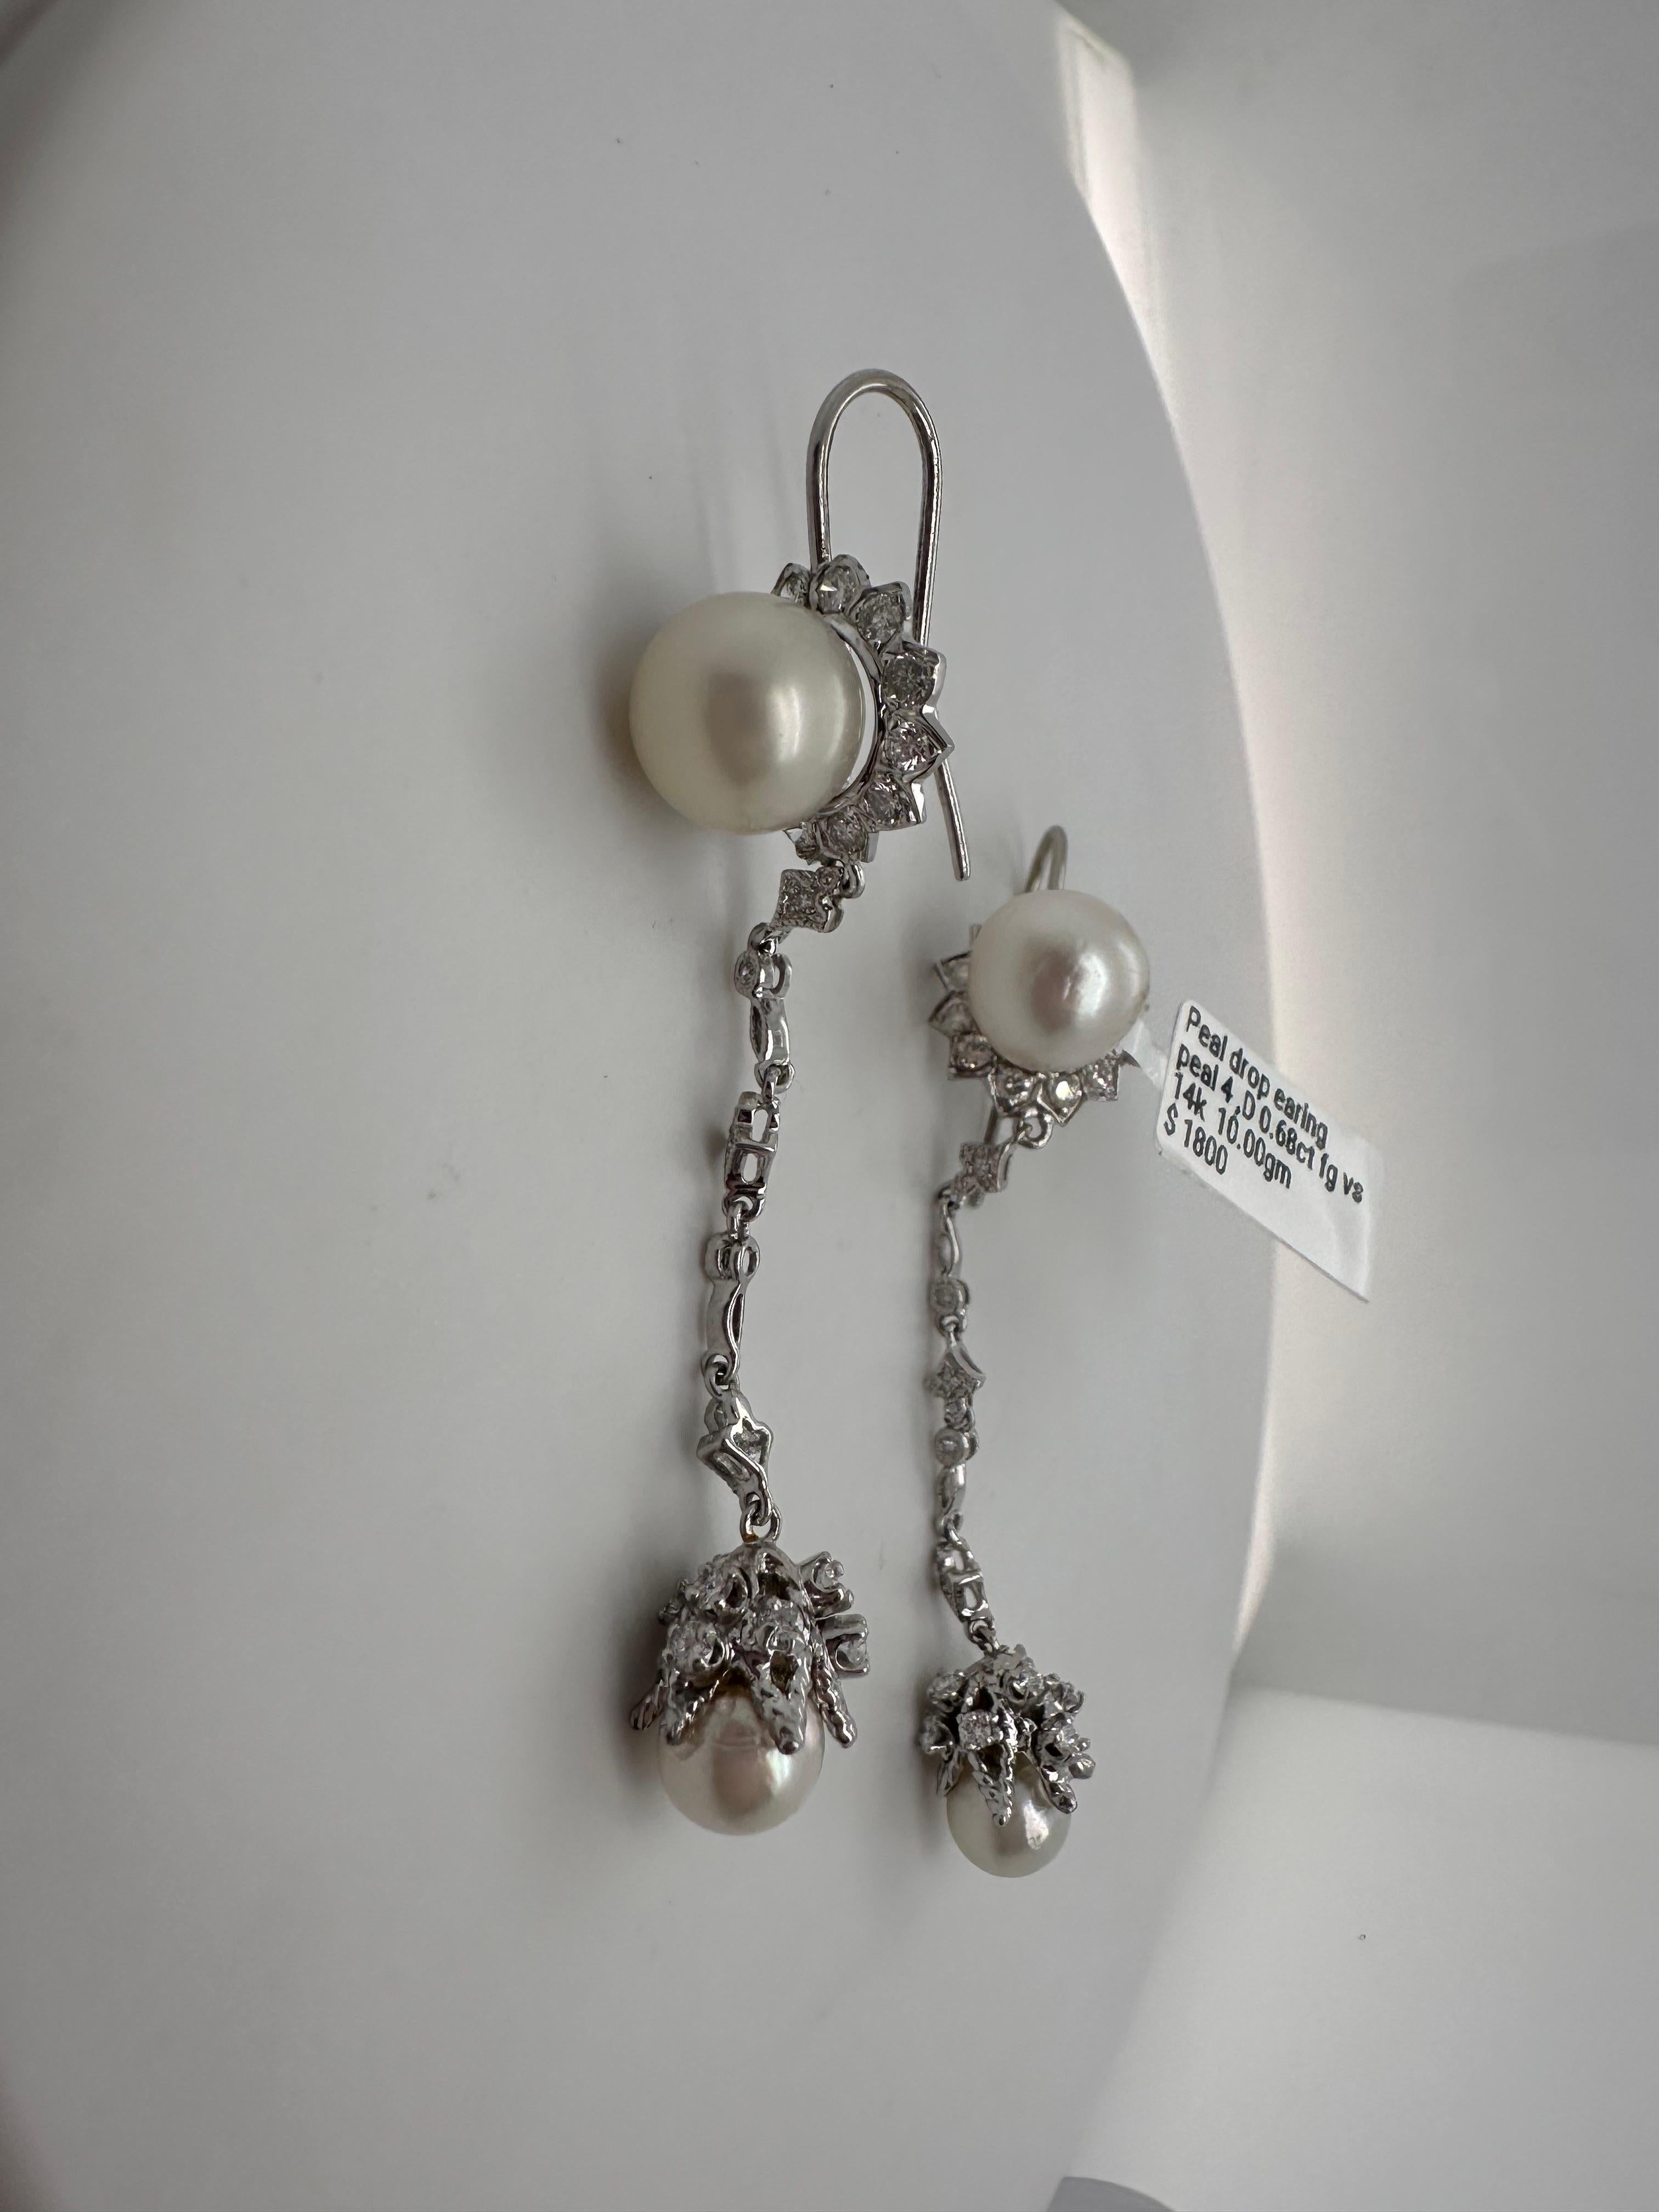 Long pearl earrings with 0.68 carats of diamonds, stunning sparking classical earrings with natural pearls!

Metal Type: 14KT

Natural Diamond(s): 
Color: F-G
Cut:Round Brilliant
Carat: 0.68ct
Clarity: VS-SI

Certificate of authenticity comes with